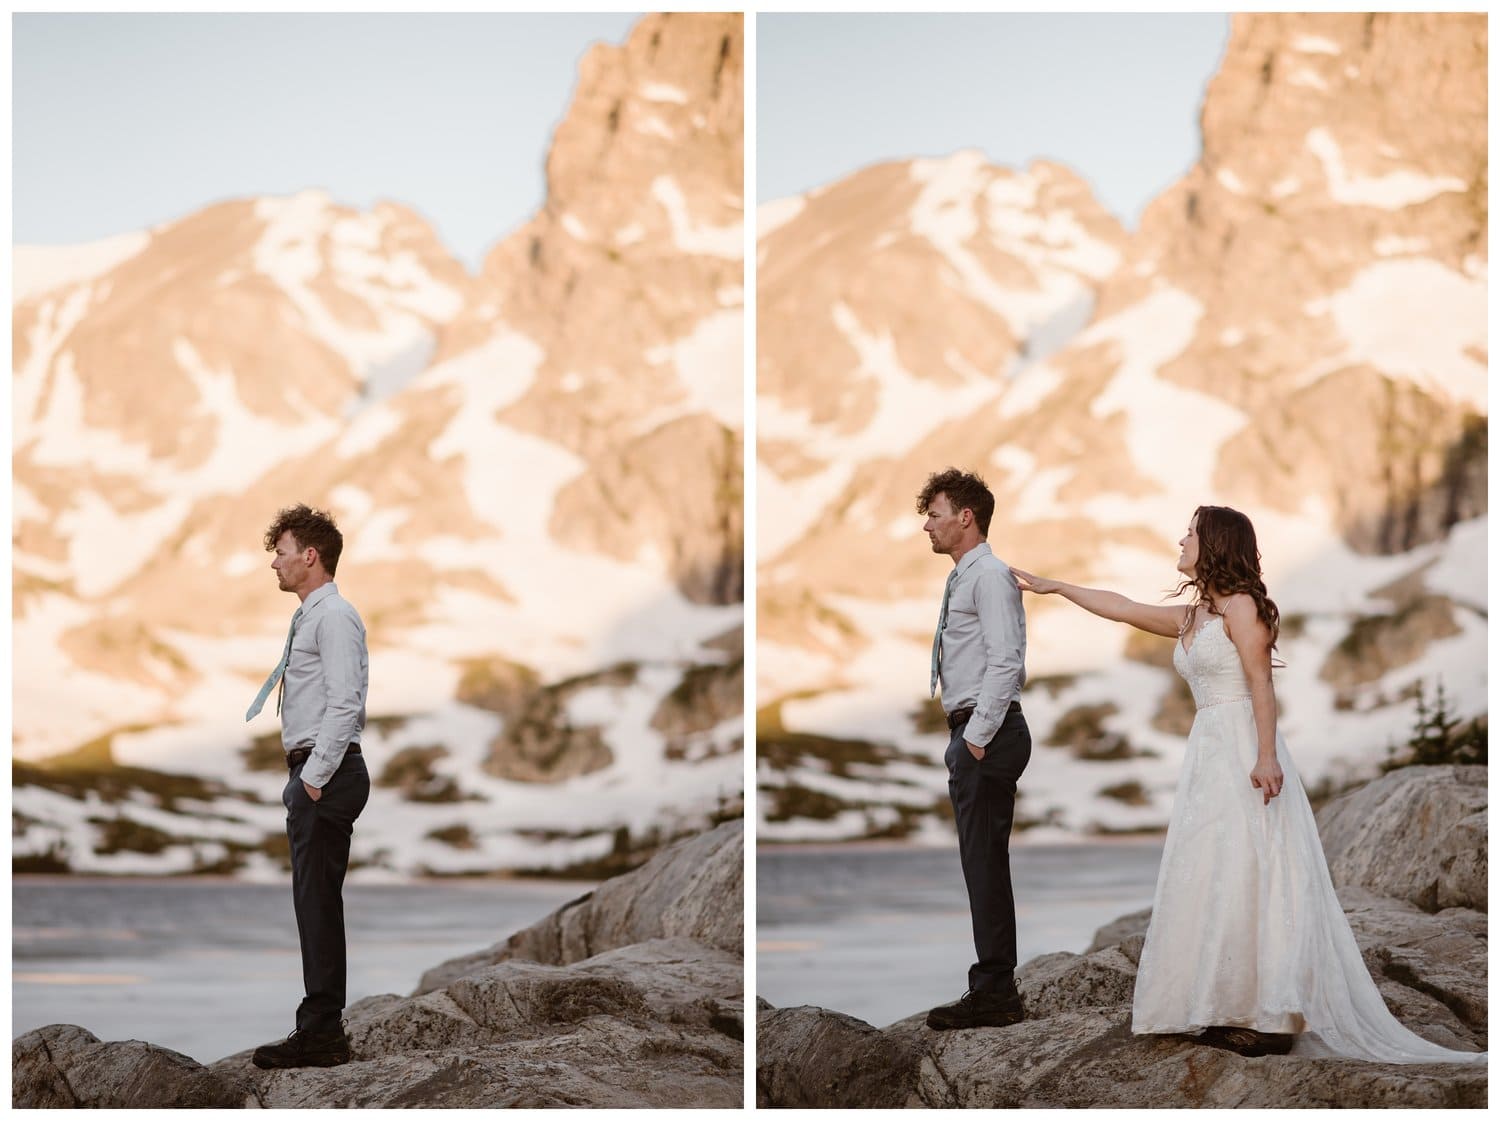 Bride taps groom on the shoulder during a first look on their elopement day at the Indian Peaks in Colorado. There is an alpine lake and snow-capped mountains with alpenglow in the background.